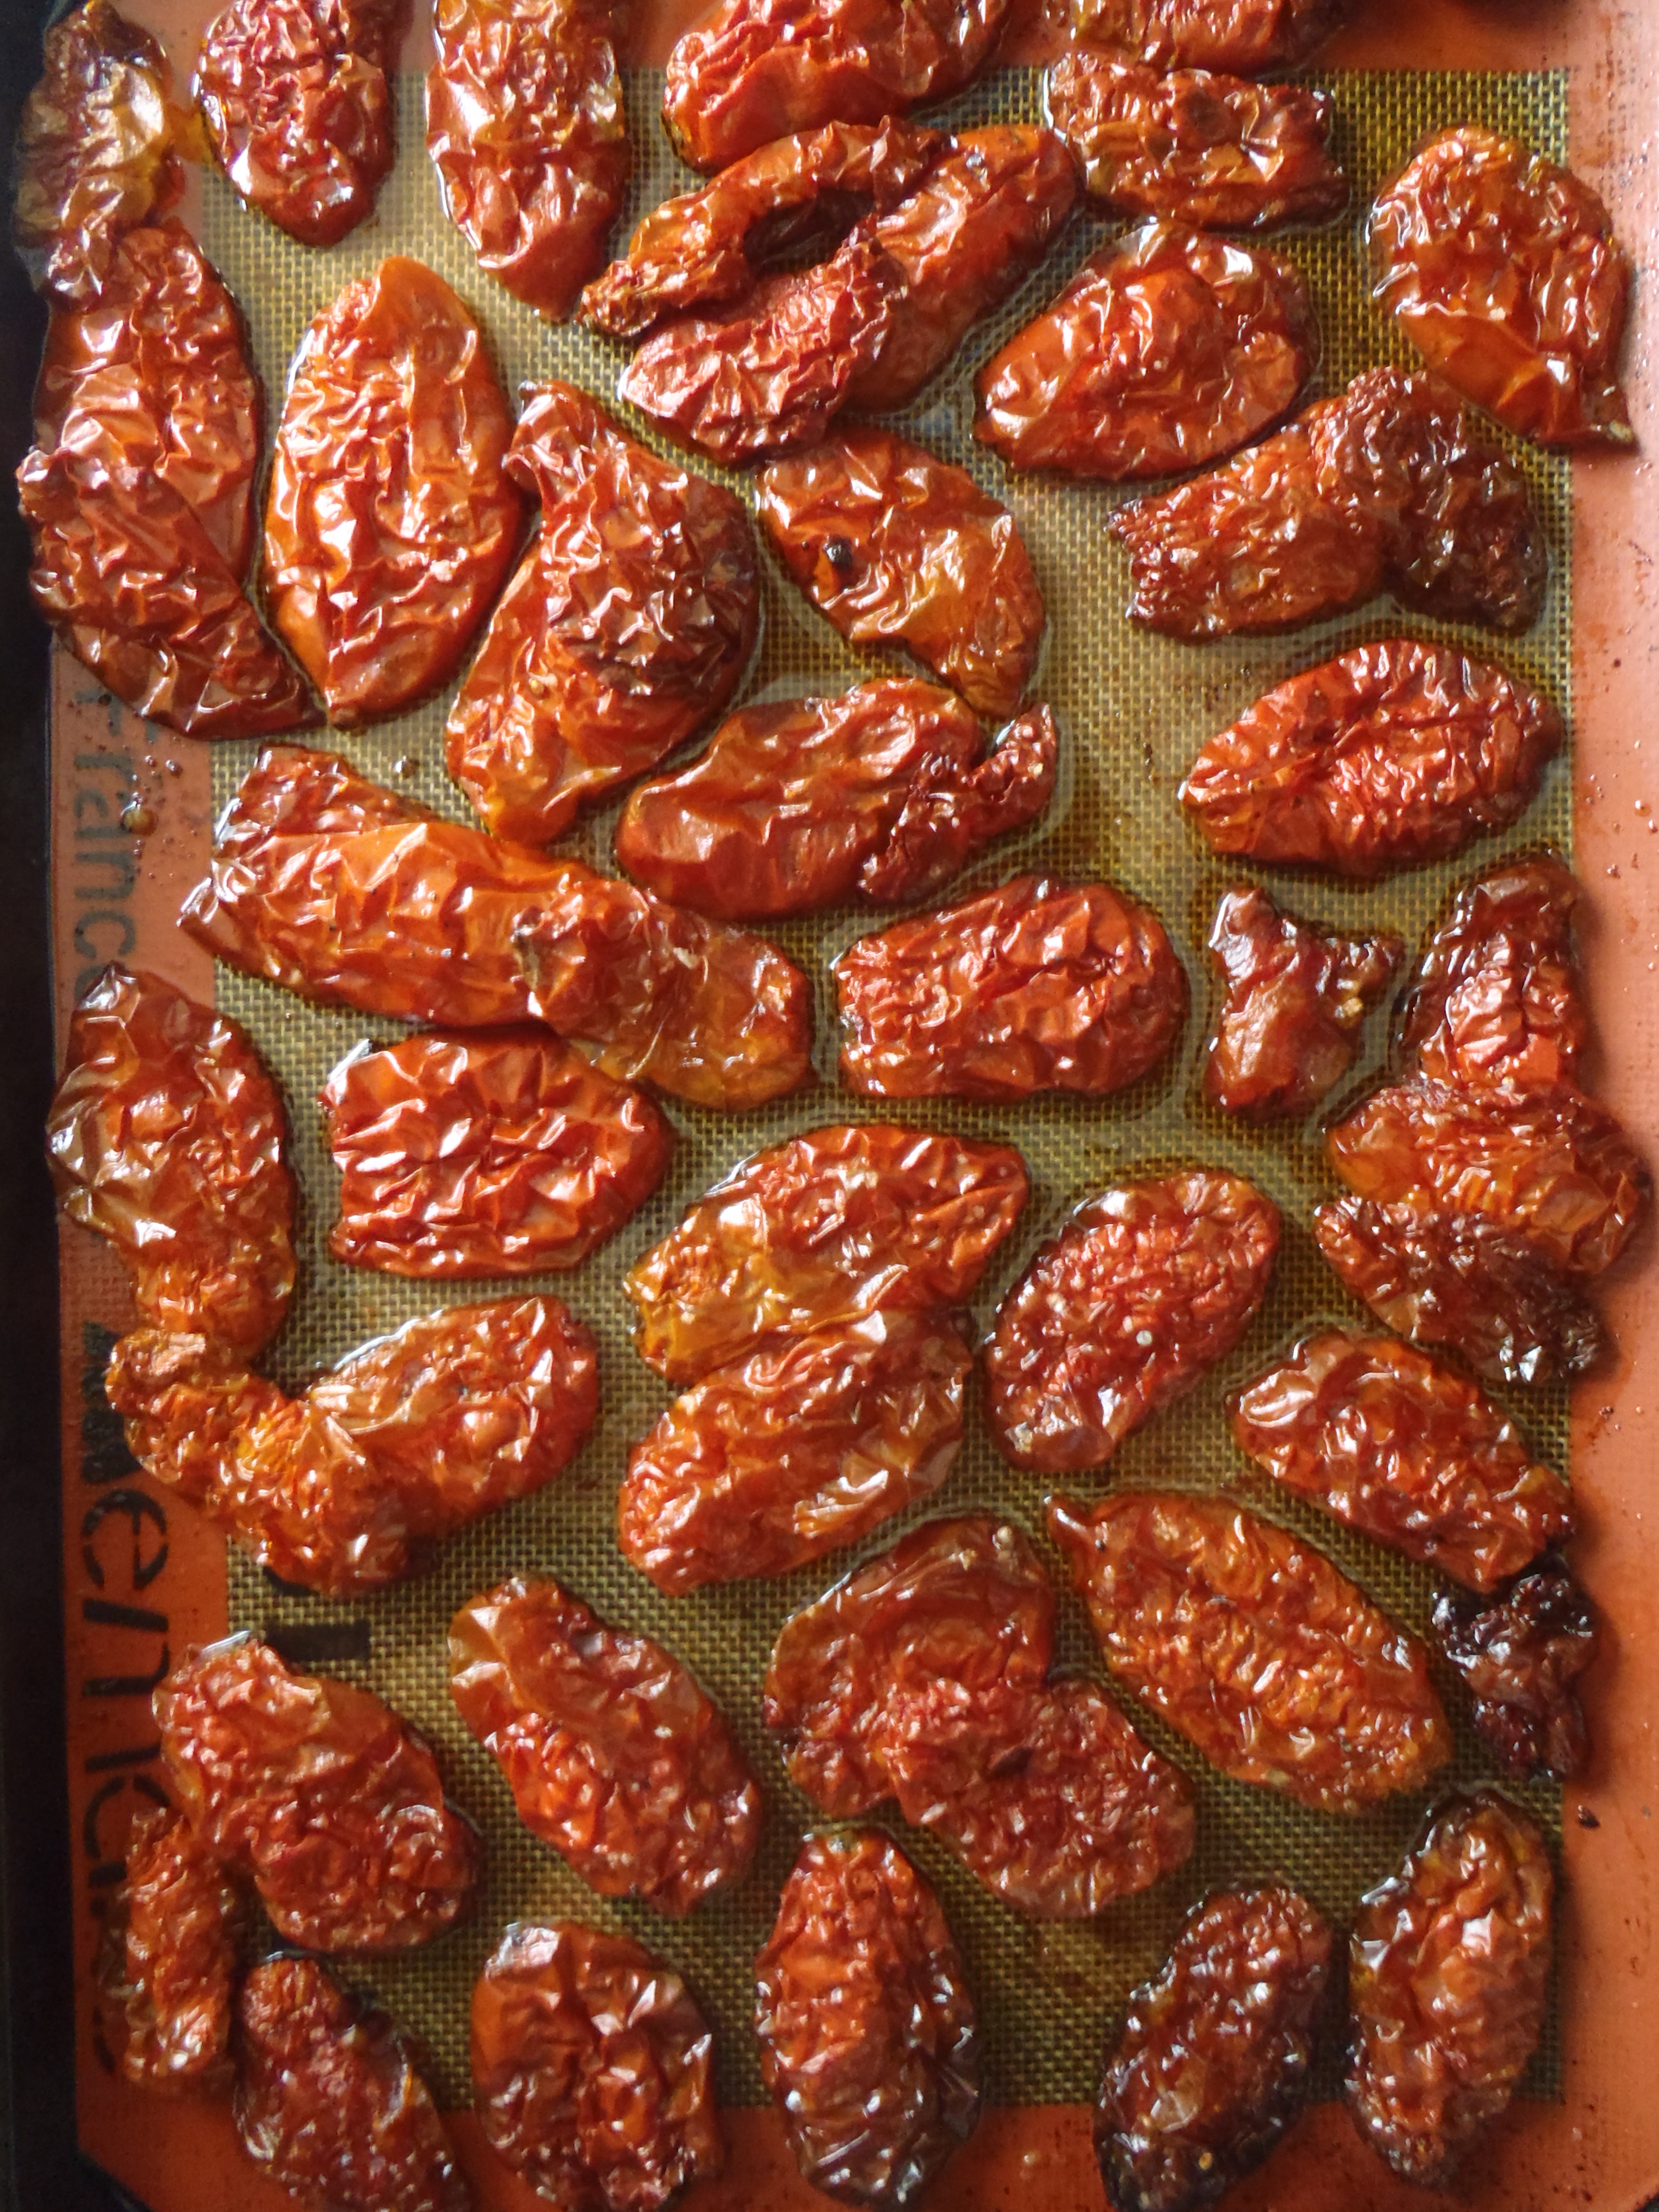 A tray of partly-dried tomatoes